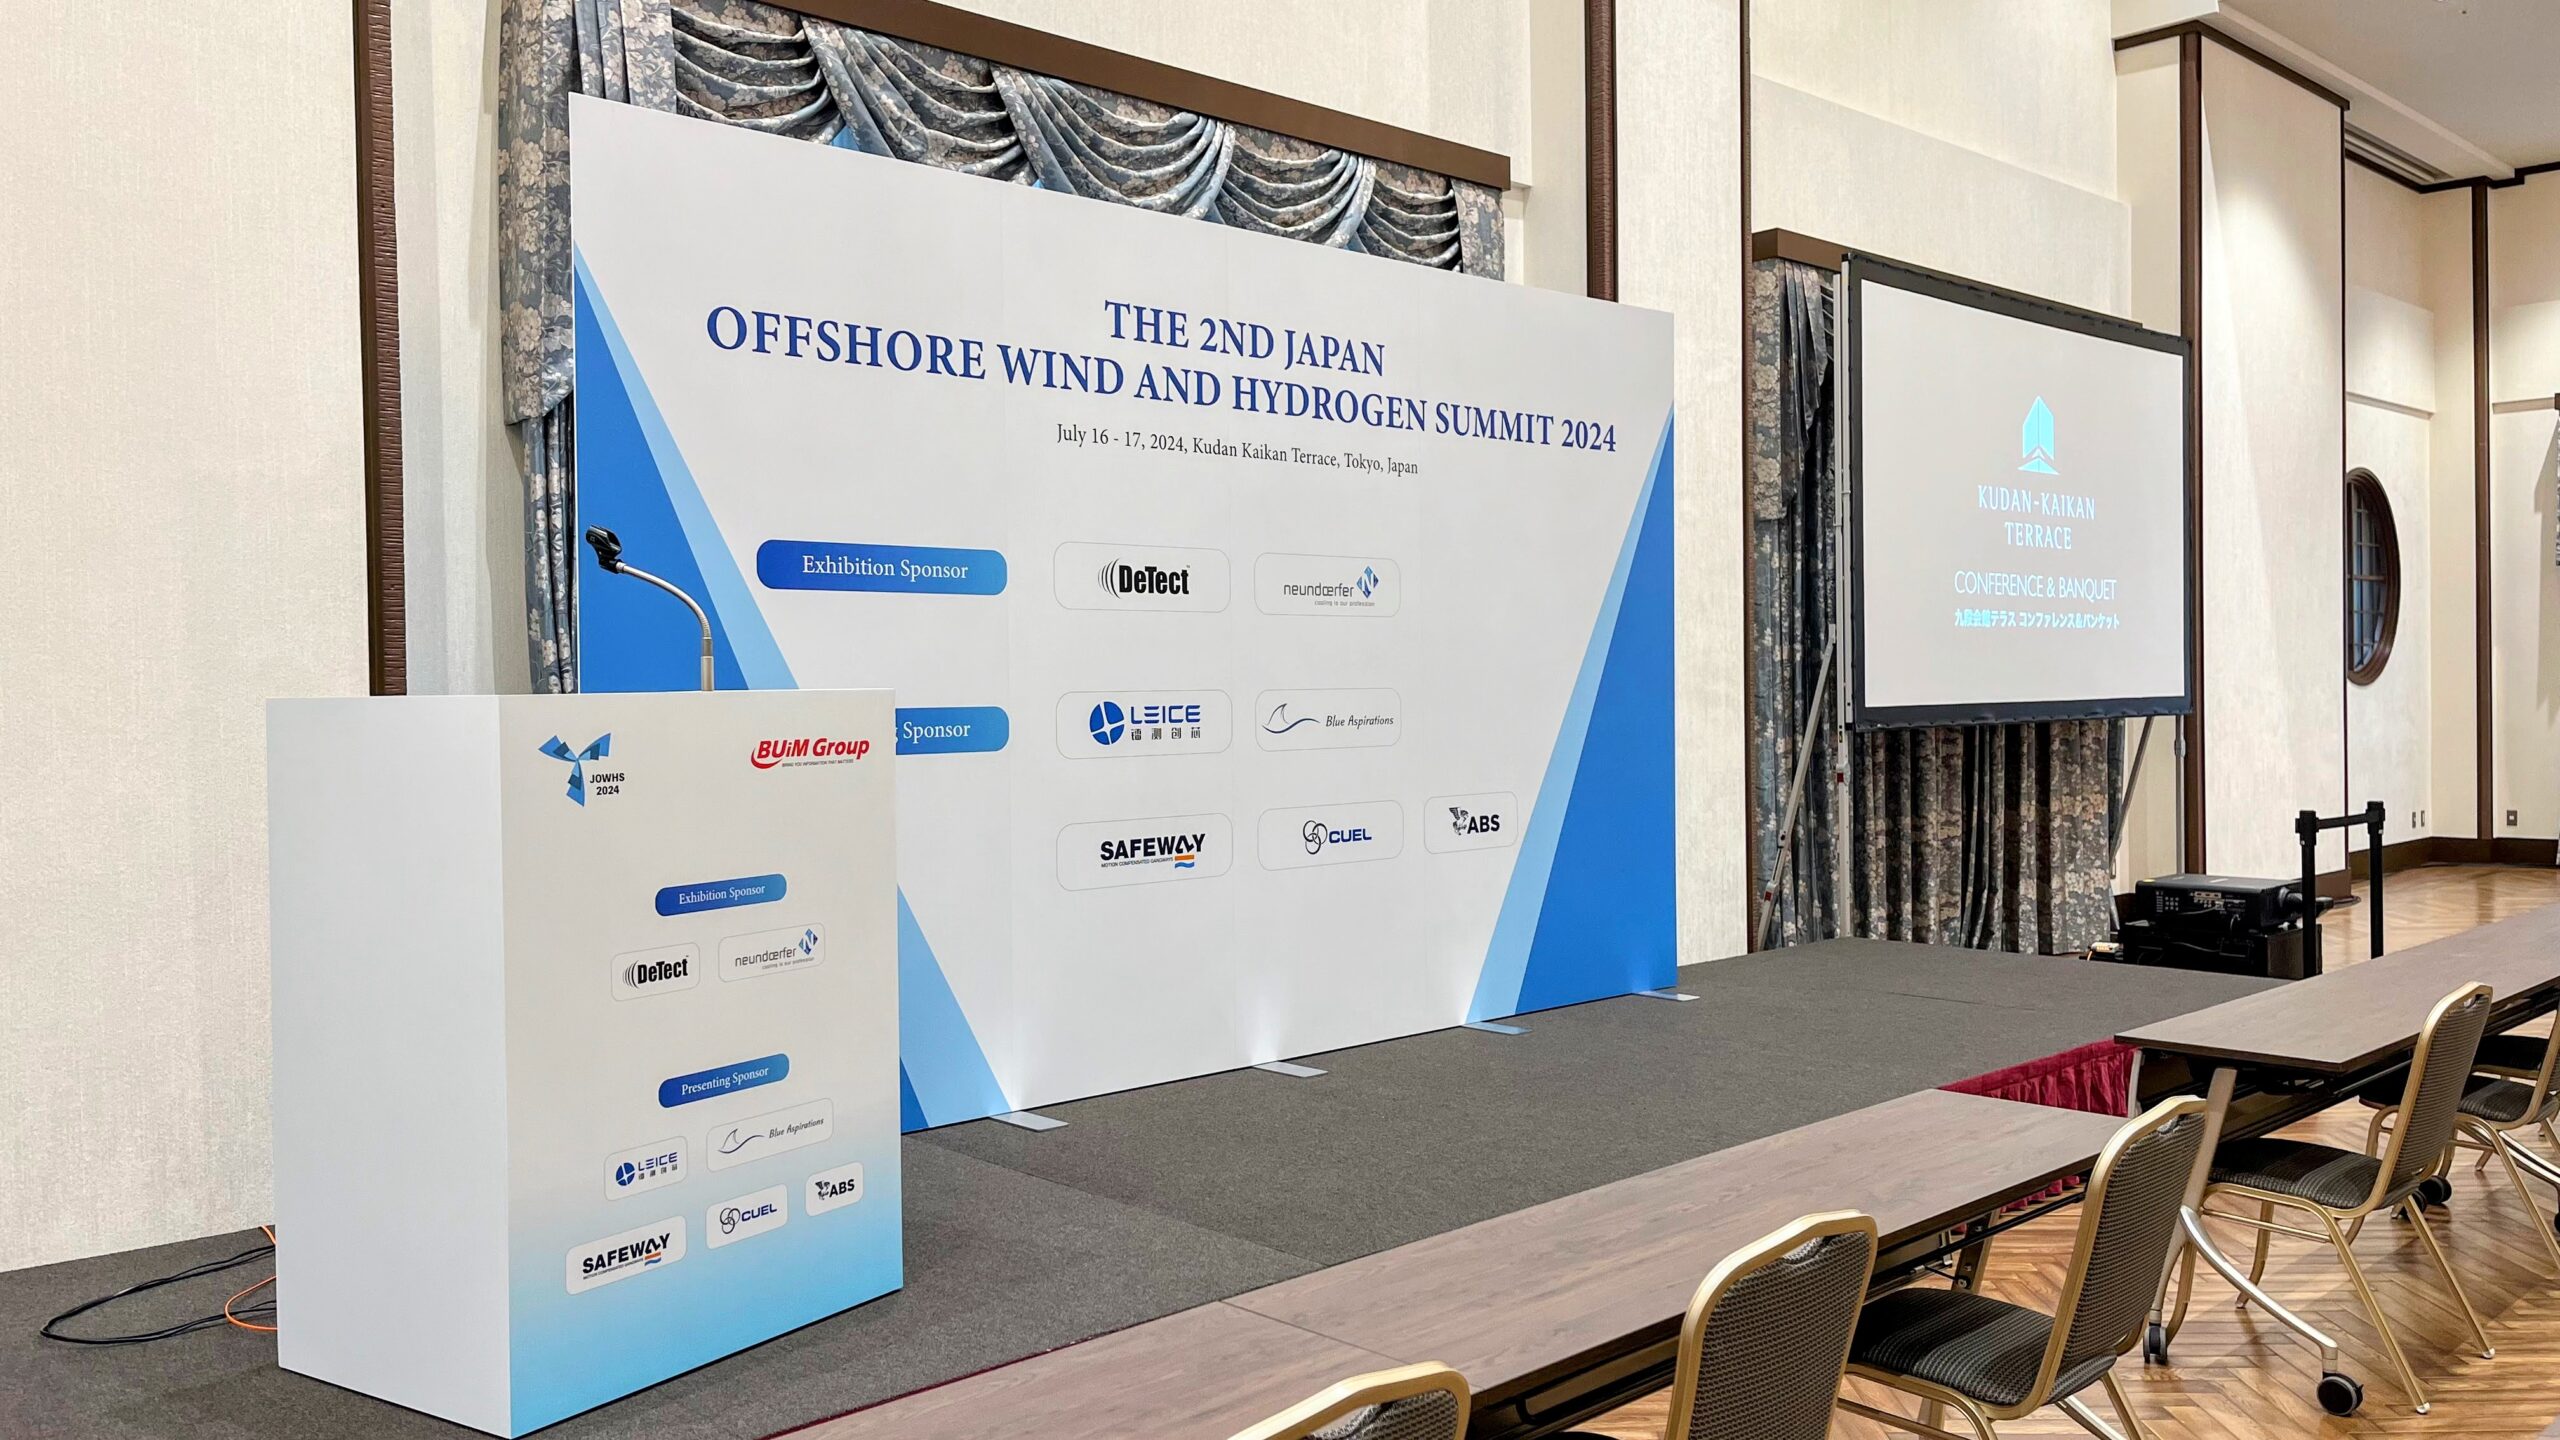 the 2nd Japan Offshore Wind and Hydrogen Summit